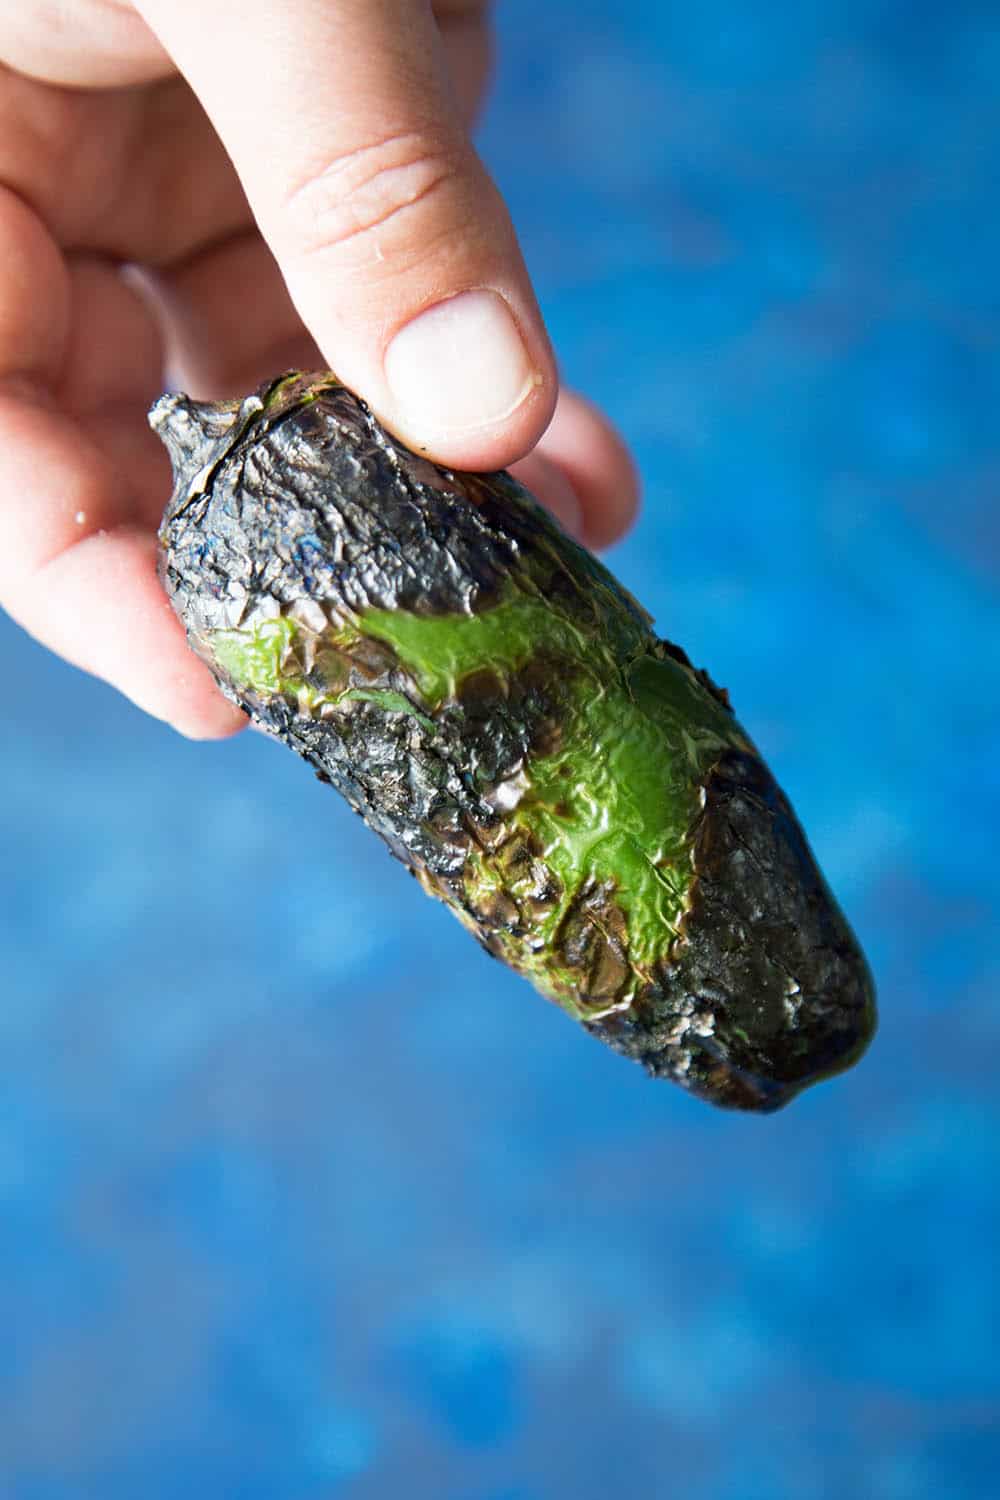 Holding one of the Roasted Jalapeno Peppers